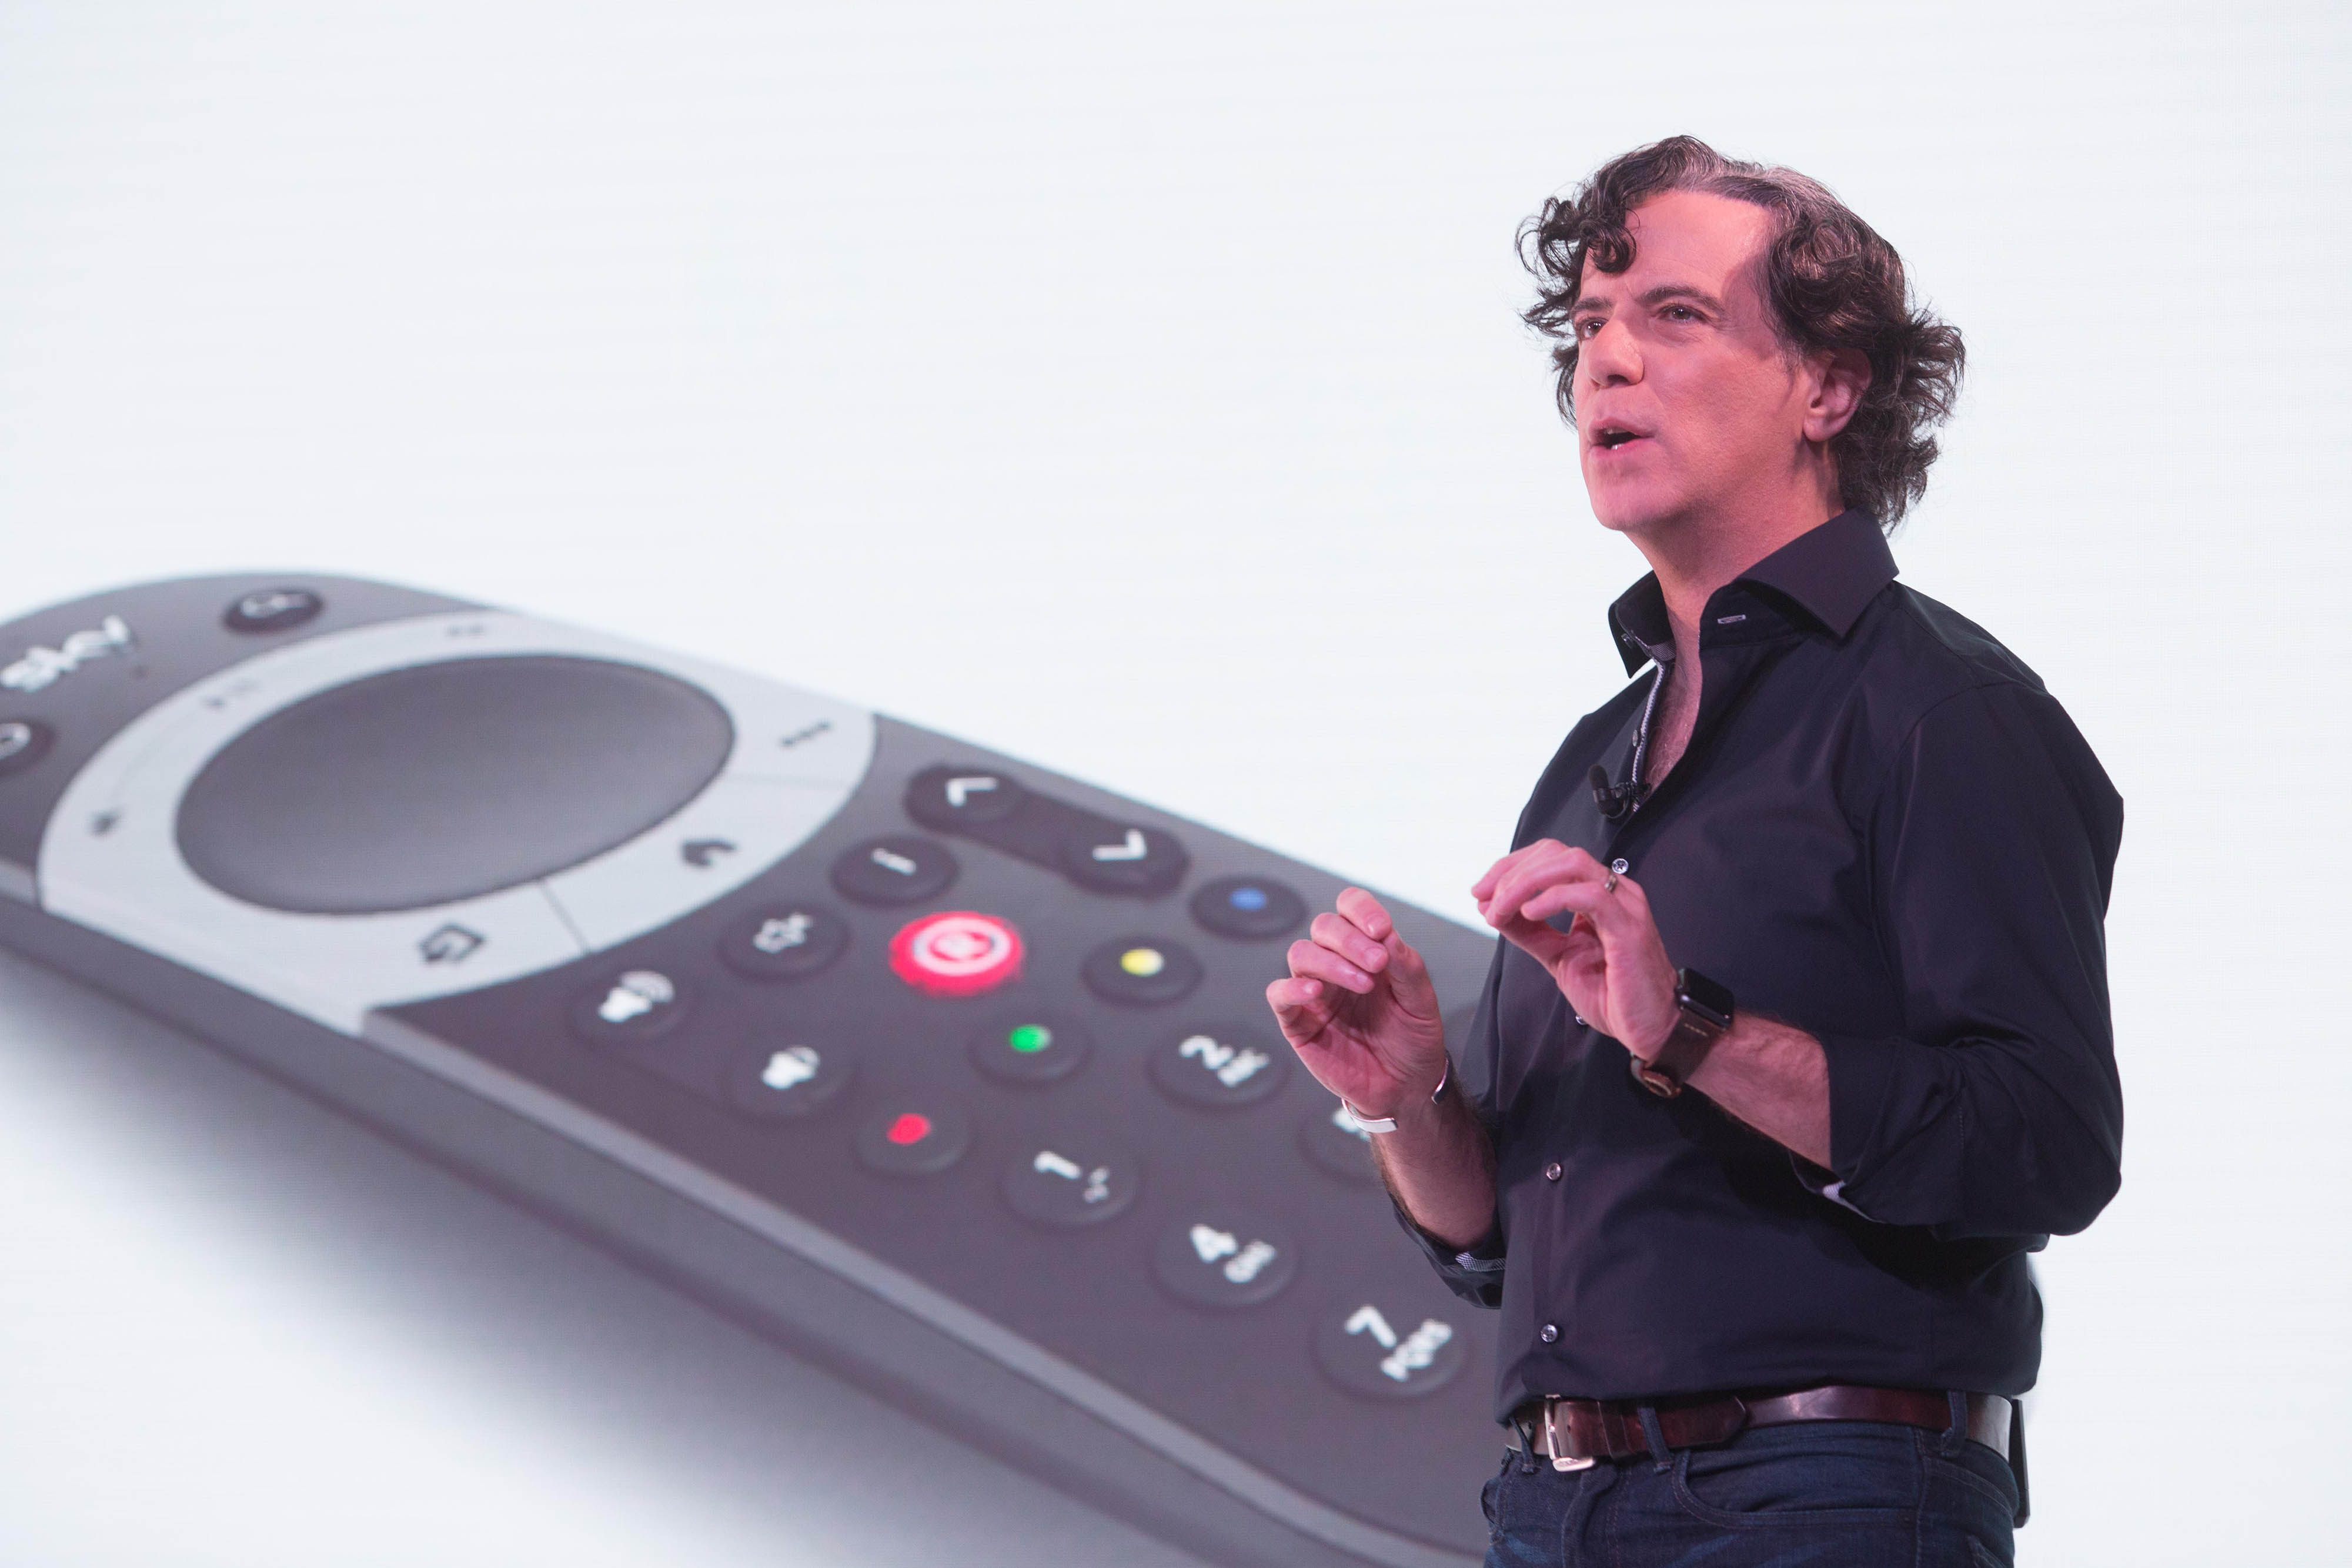 Introducing Sky Q: a whole new way of watching TV